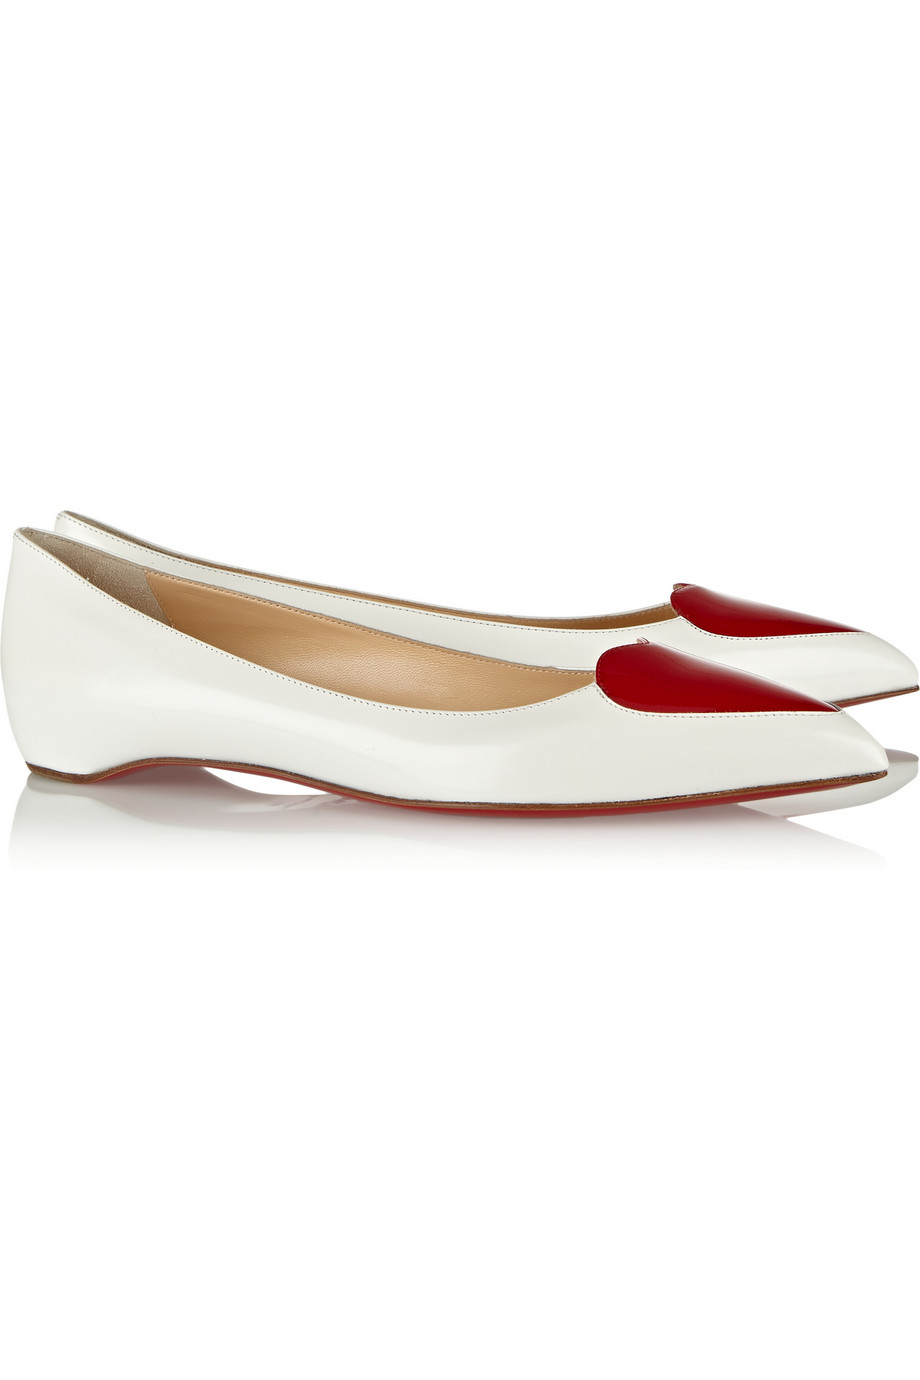 christian louboutin pointed-toe flats | Learn to Read Music Course ...